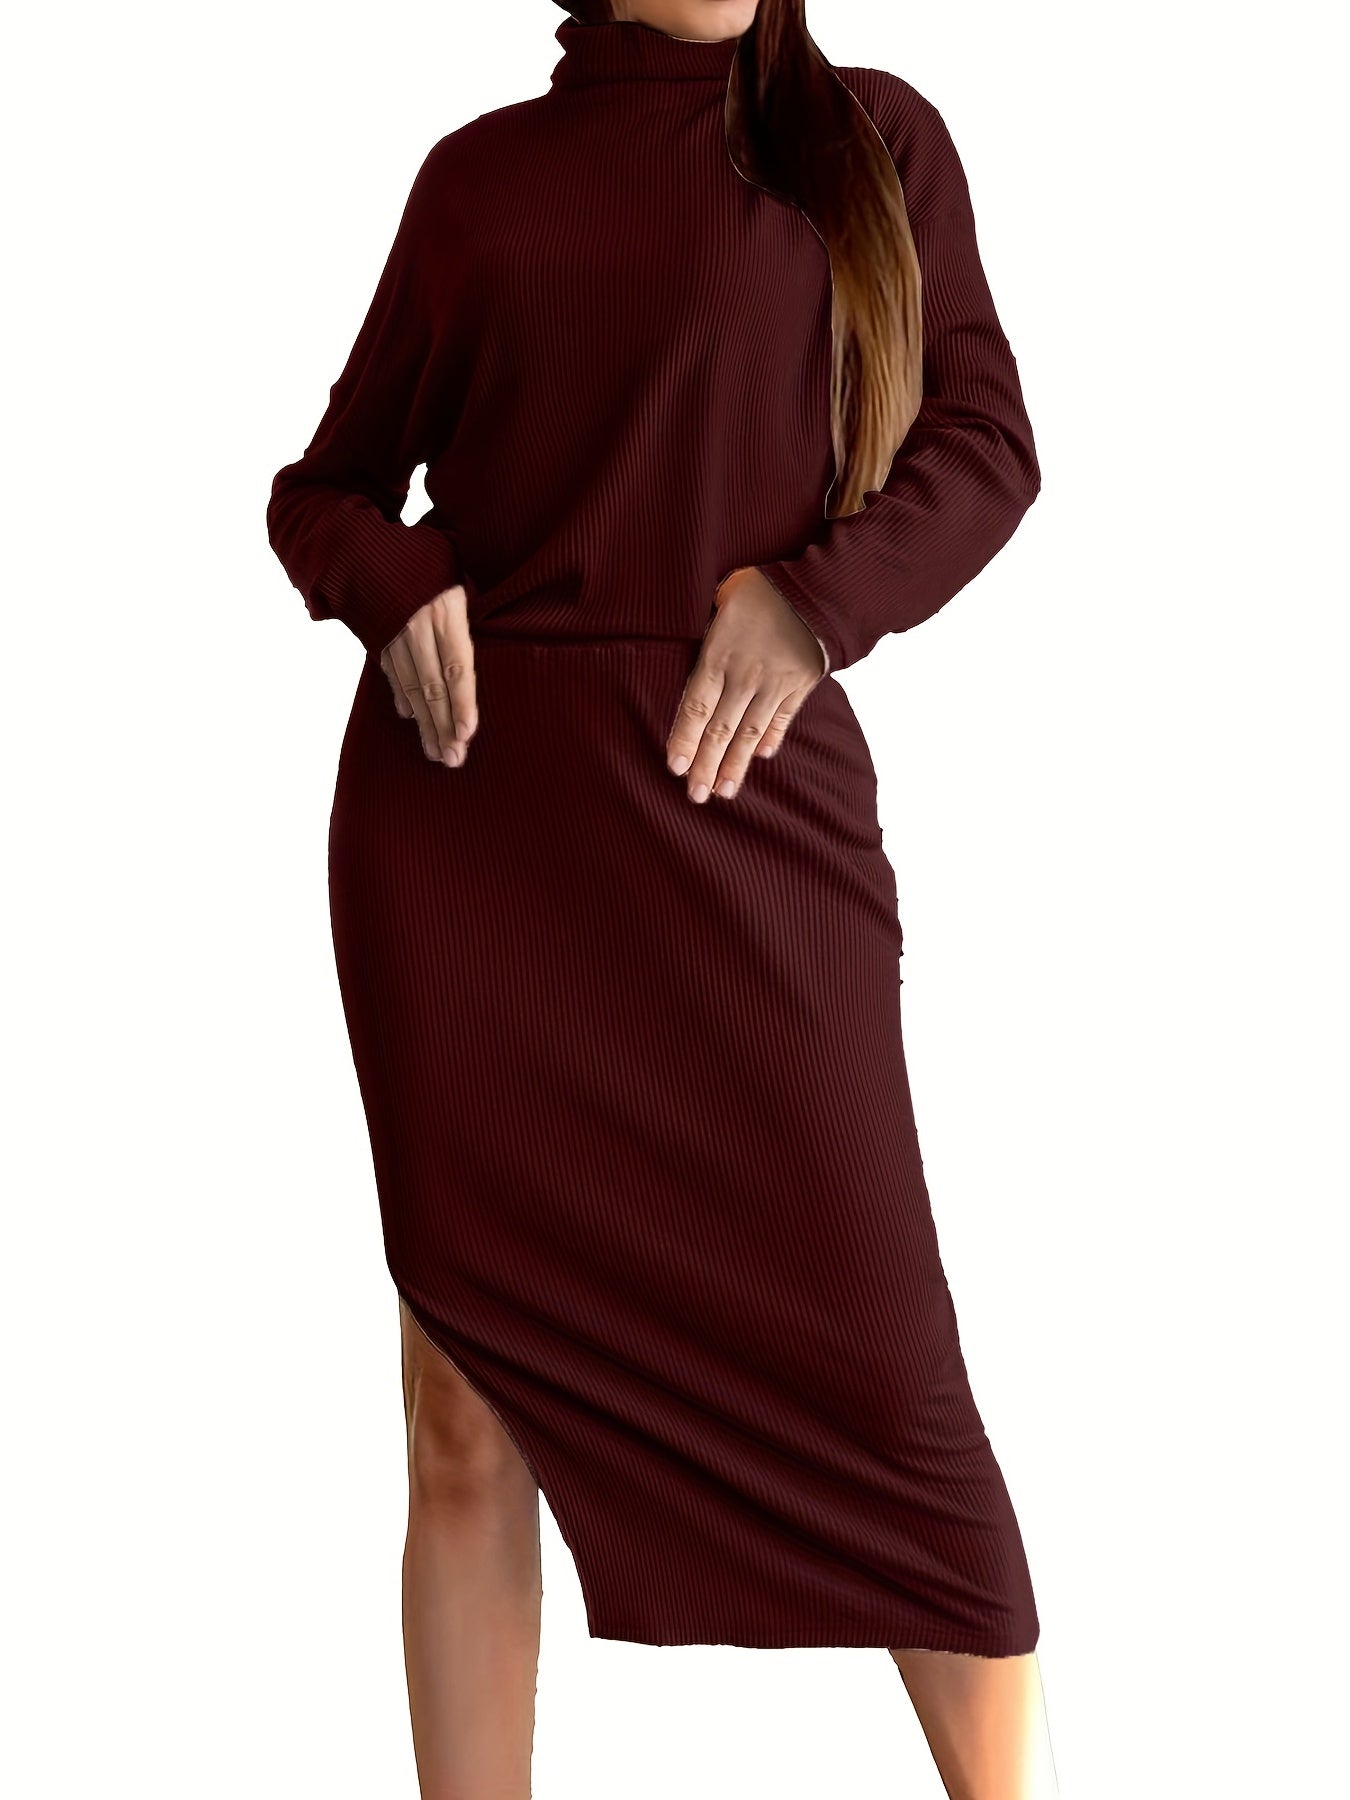 Antmvs Plus Size Casual Outfits Two Piece Set, Women's Plus Solid Ribbed Long Sleeve High Neck Top & Split Hem Midi Skirt Outfits 2 Piece Set